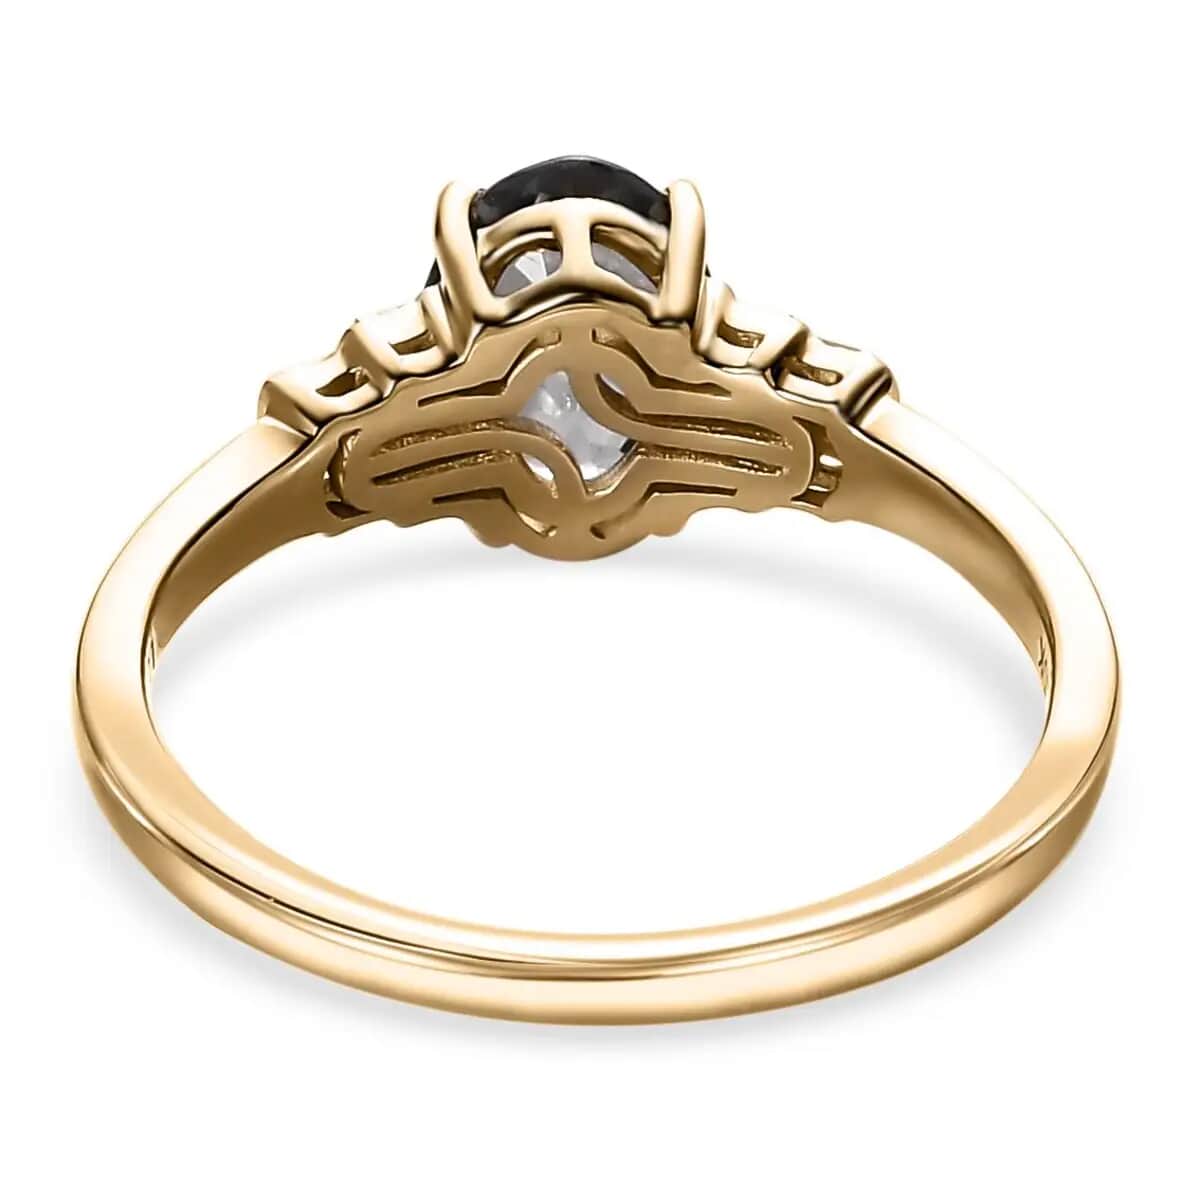 shoplc.com: RING RING ☎️ 45% off Overstock Rings